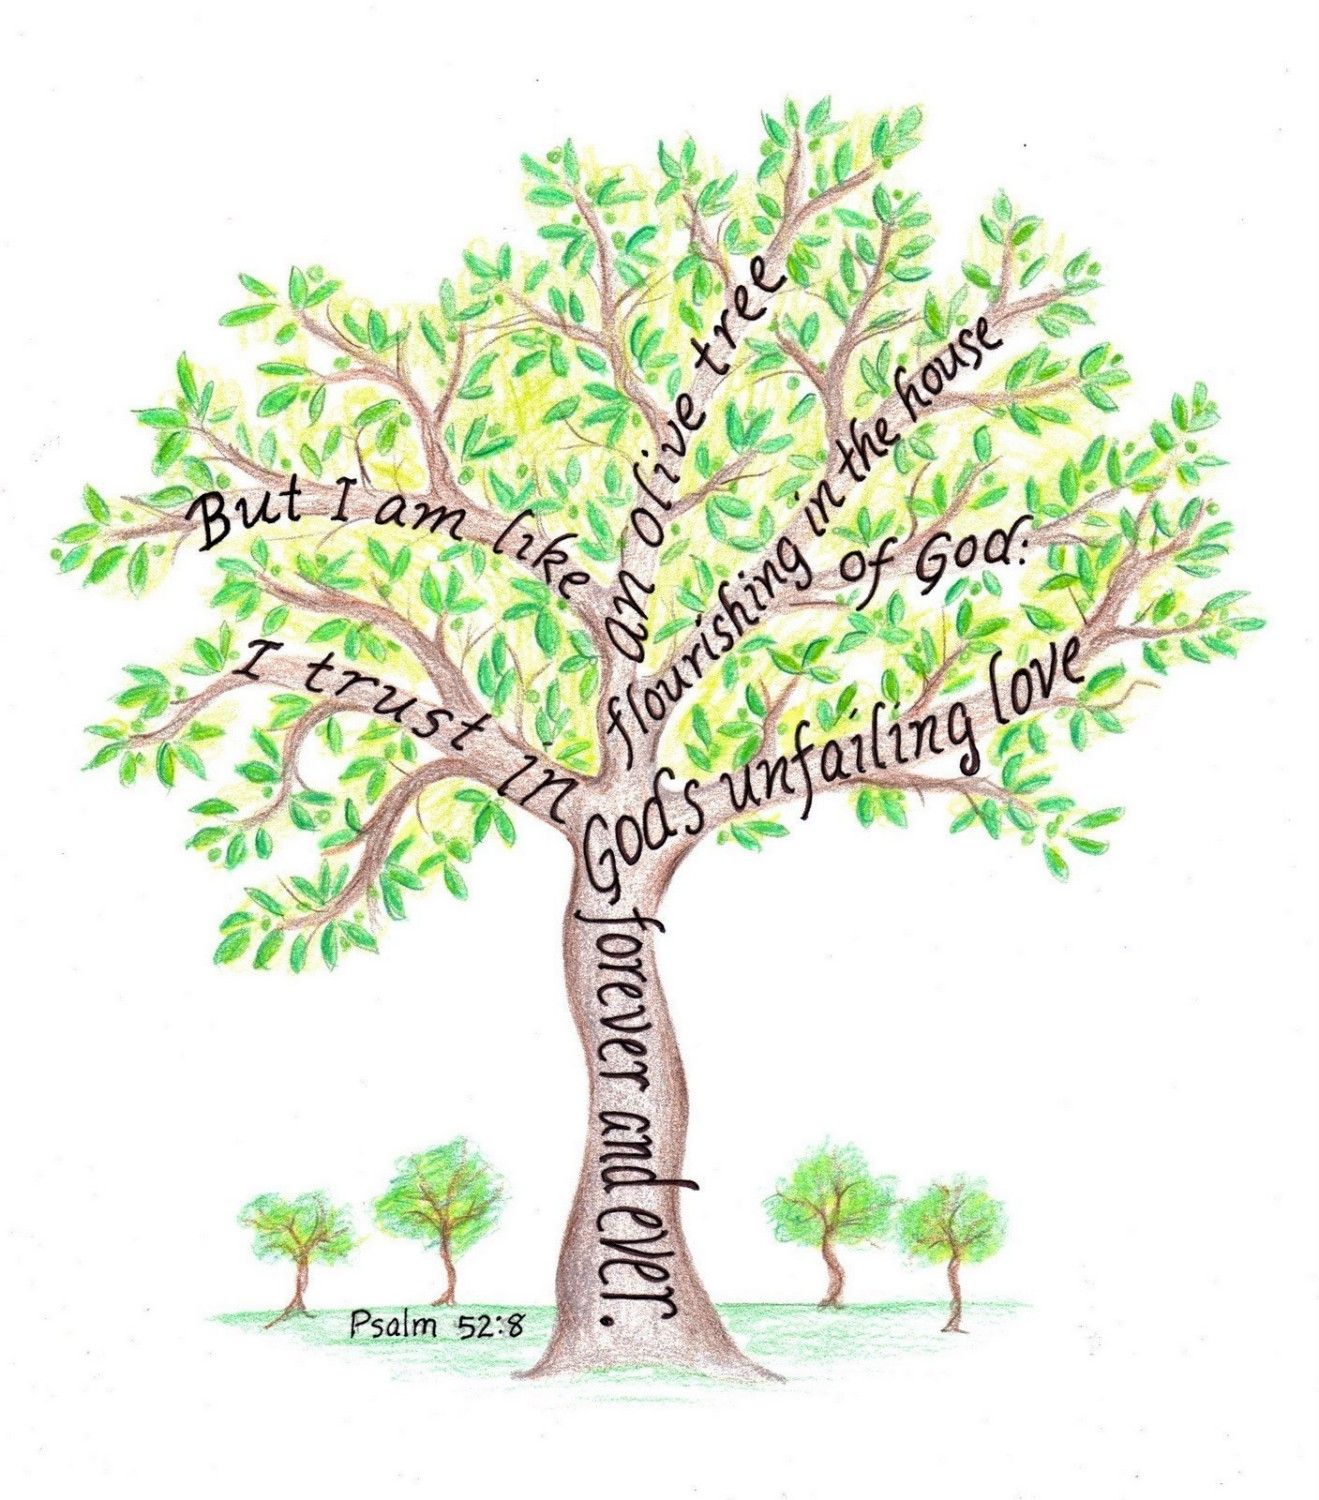 Tree pictures with scripture verses | Olive tree drawing ...